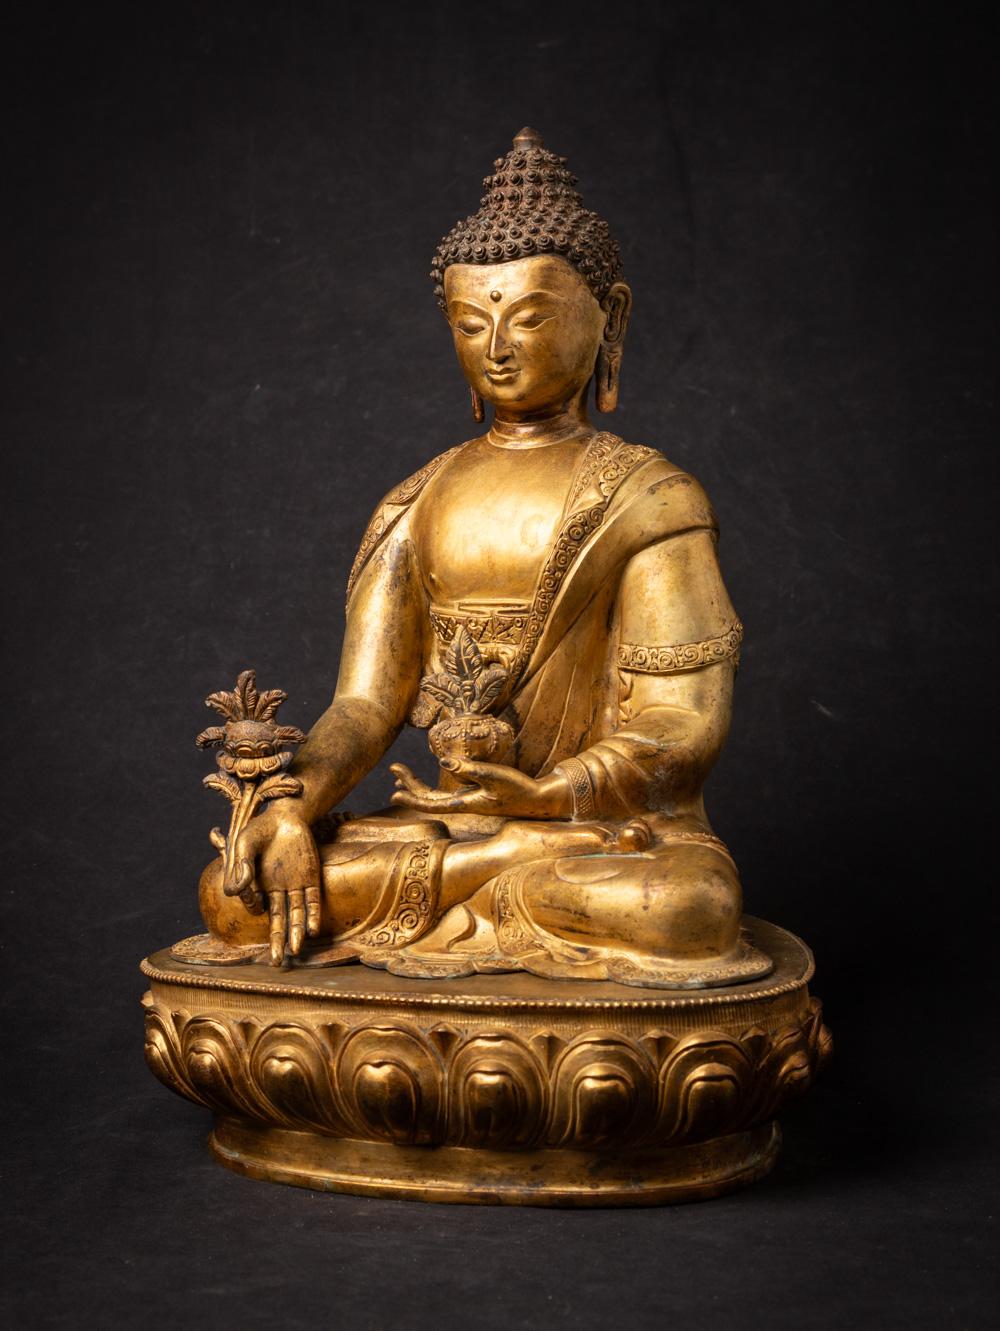 This old bronze Nepali Medicine Buddha statue is a true masterpiece of craftsmanship and spirituality. Standing at a majestic 44.5 cm in height, with dimensions of 30.5 cm in width and 23 cm in depth, it is a substantial representation of the